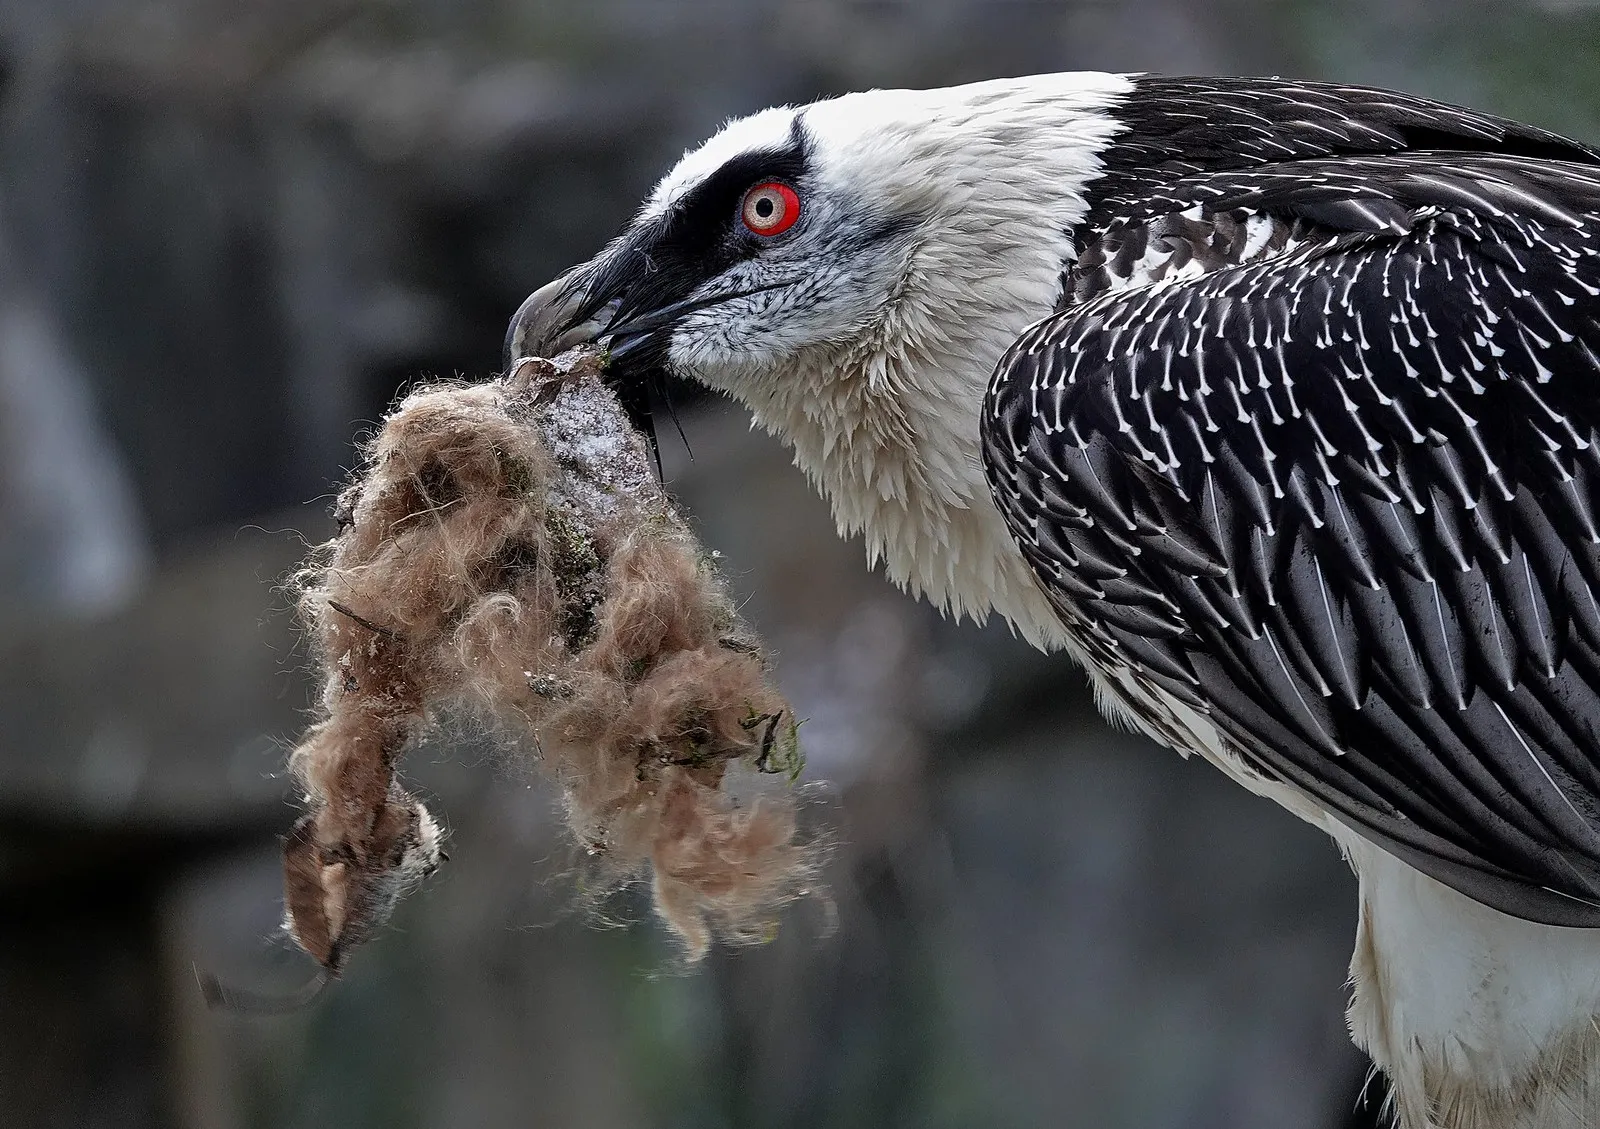 Bearded Vulture Facts